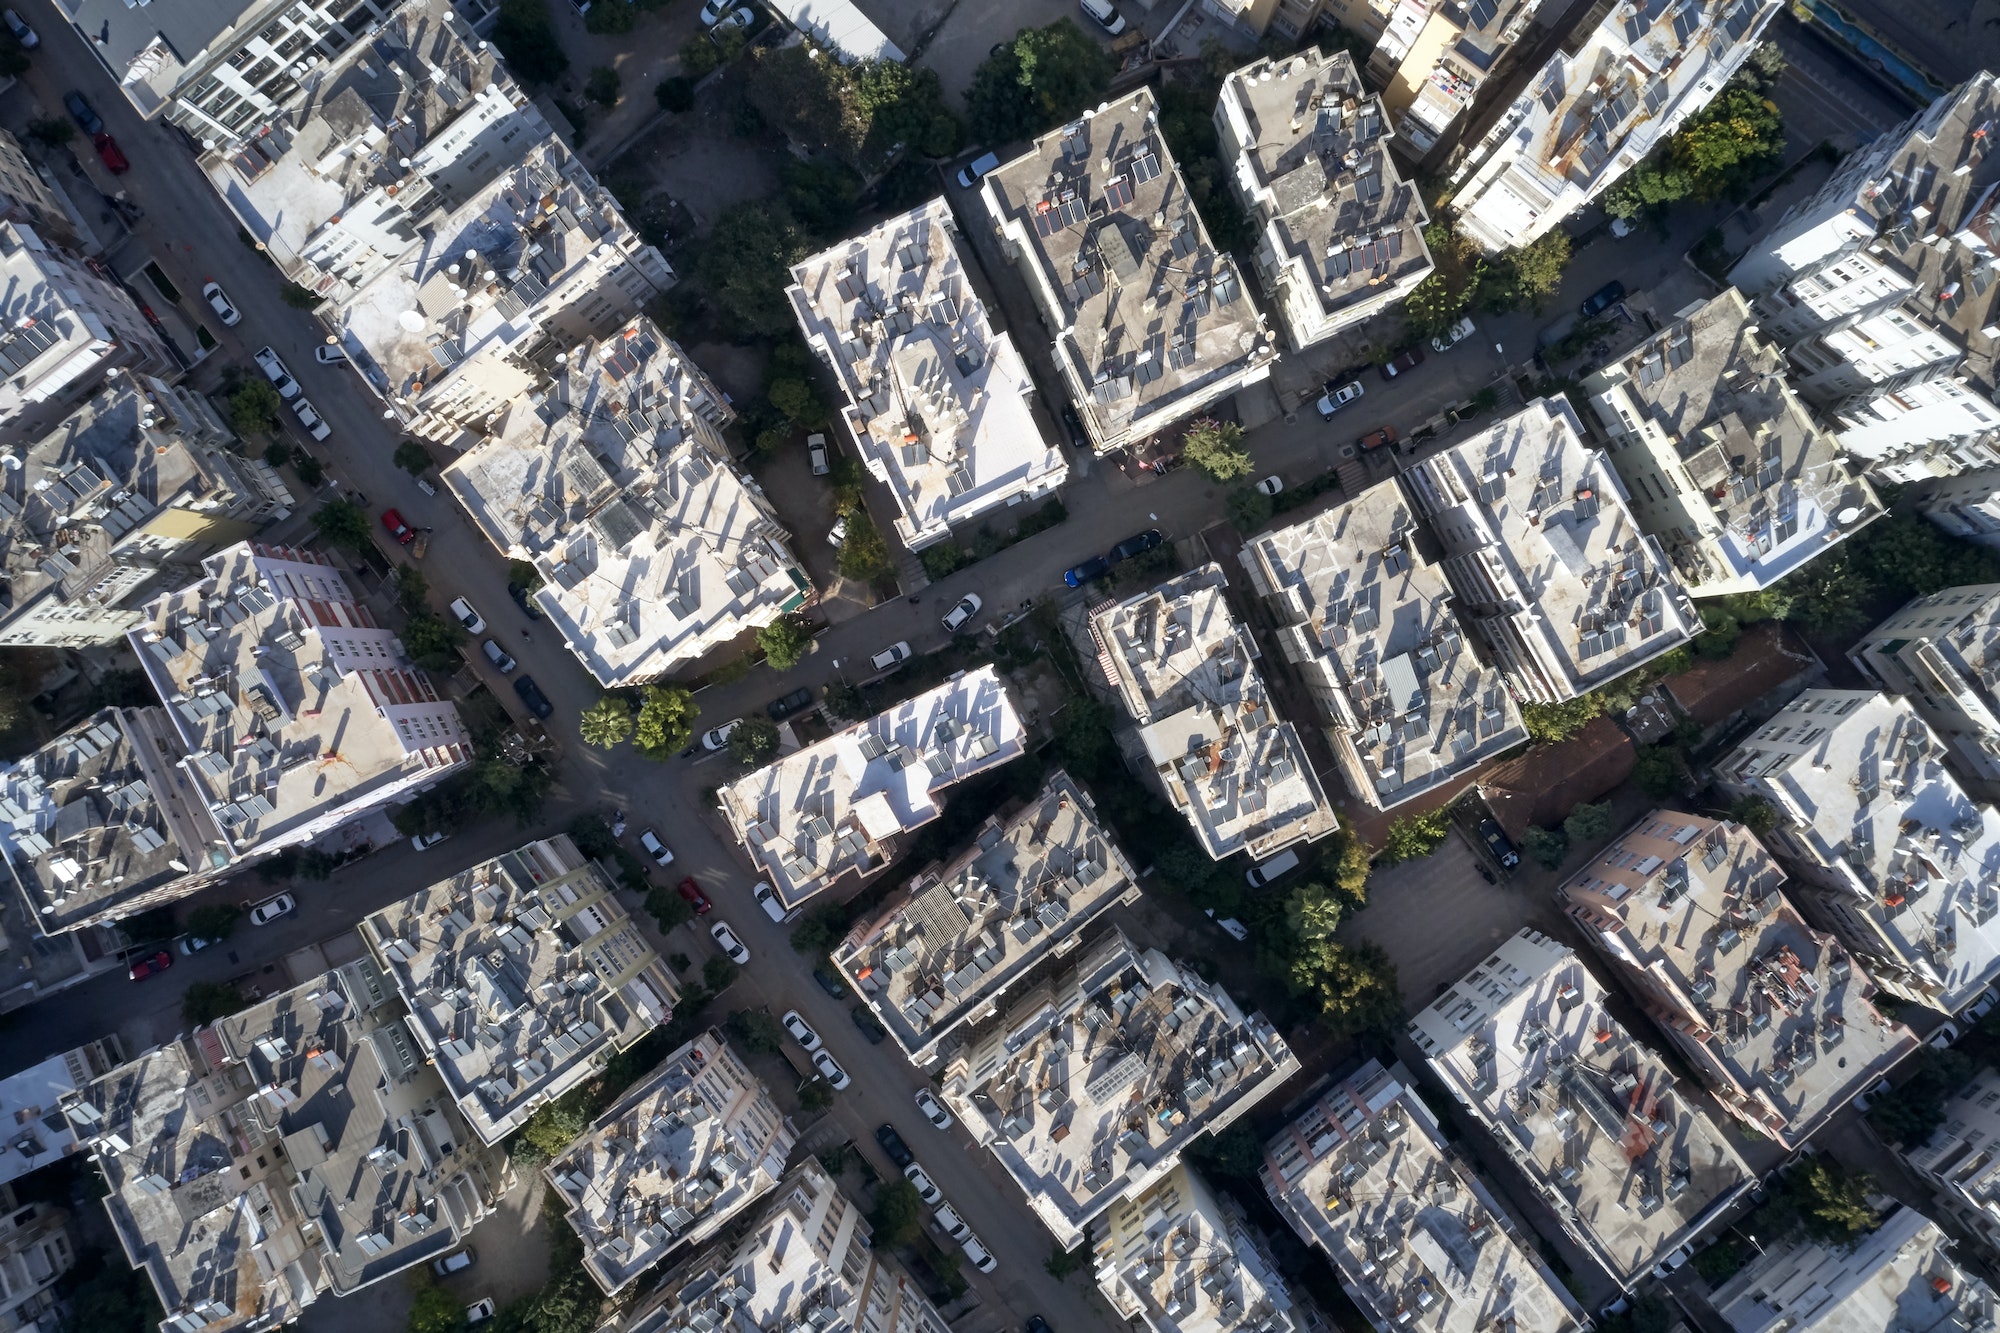 Aerial view of rooftops of urban buildings with solar panels.